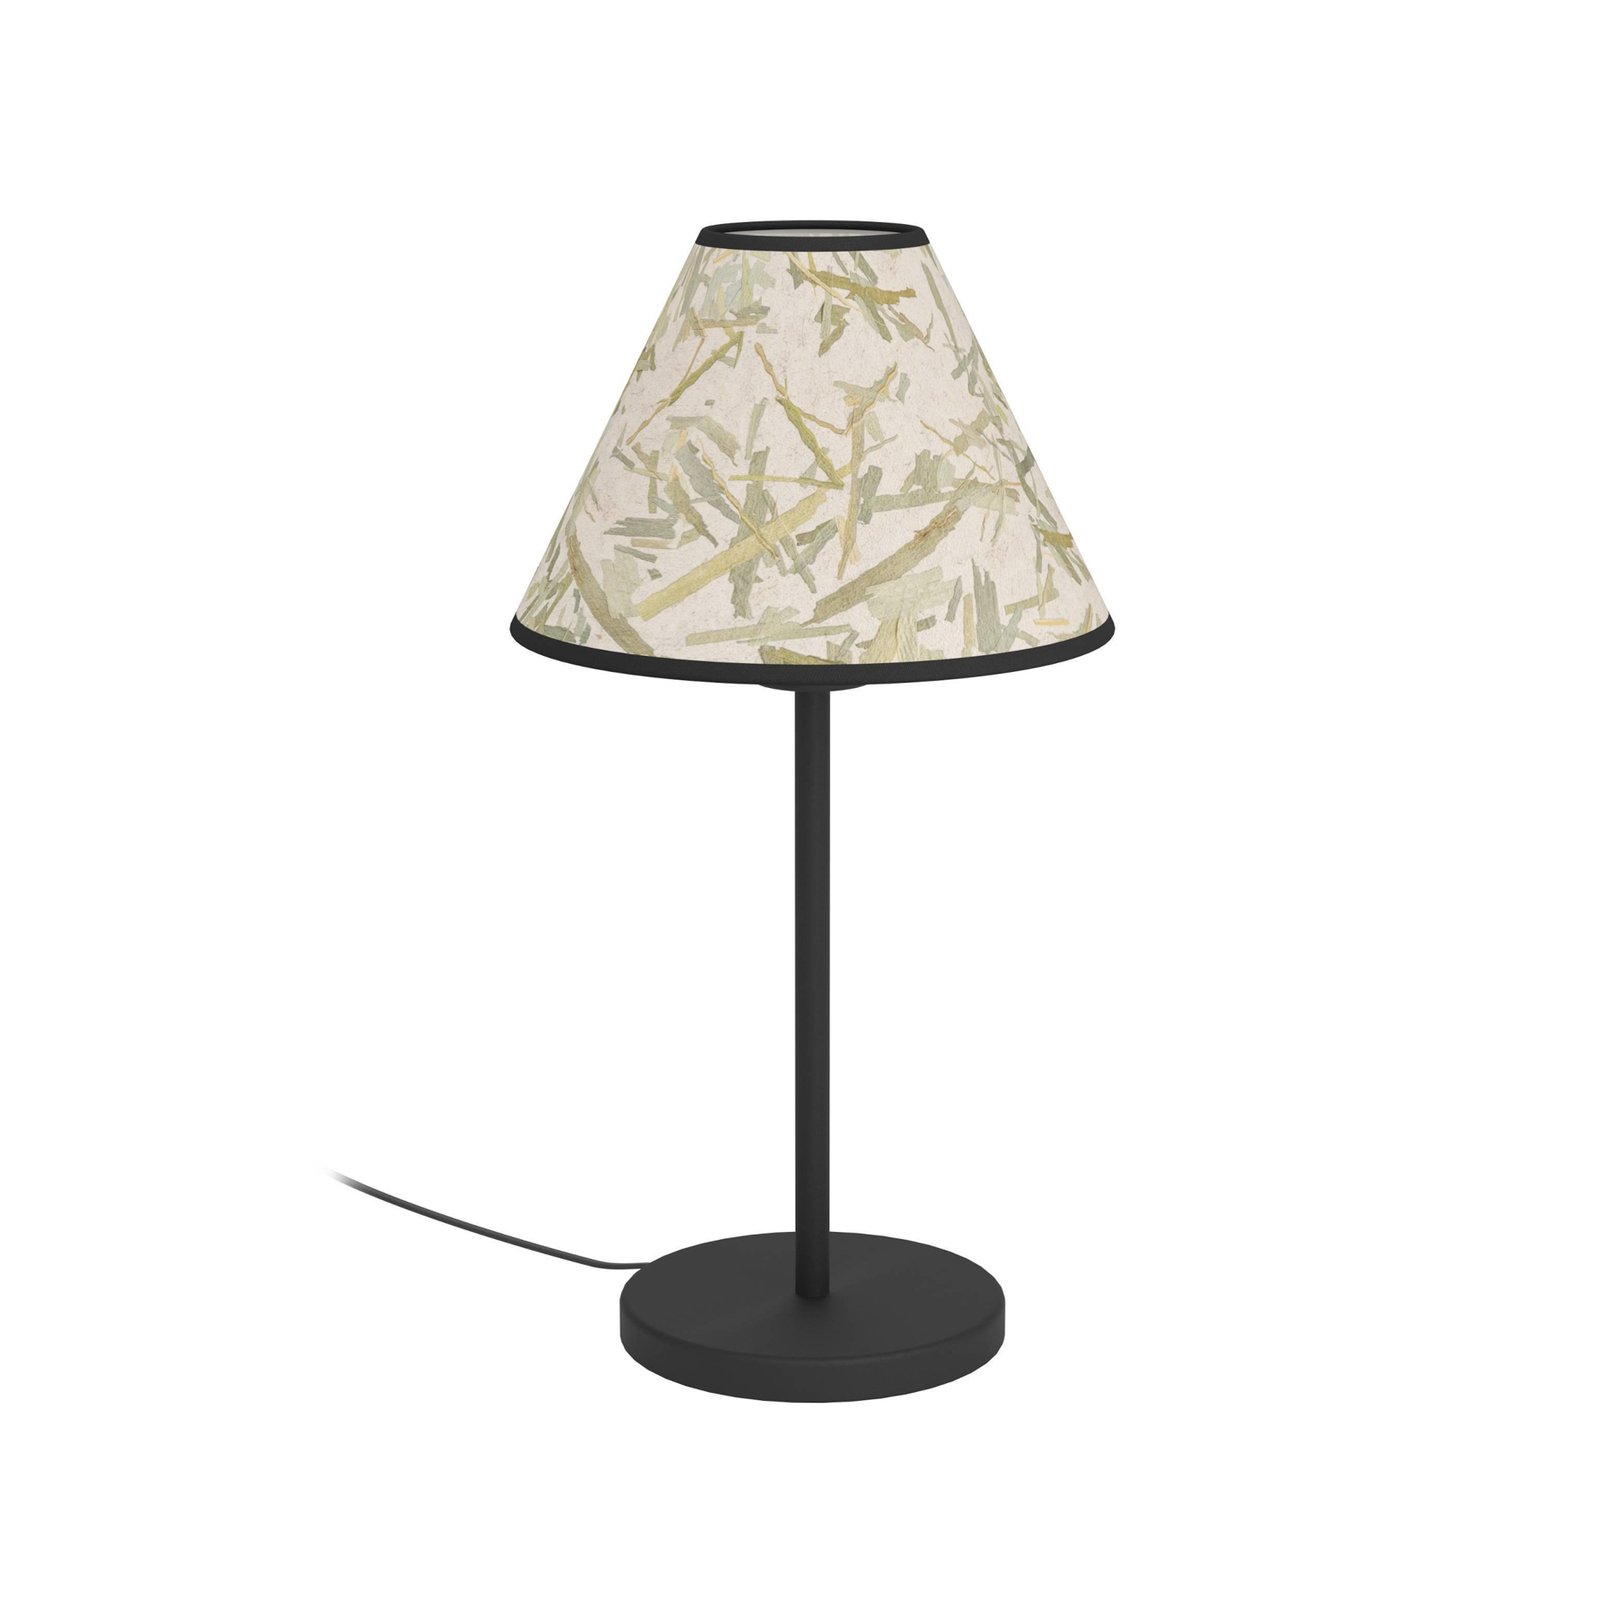 Oxpark table lamp, height 41.5 cm, green/white/black